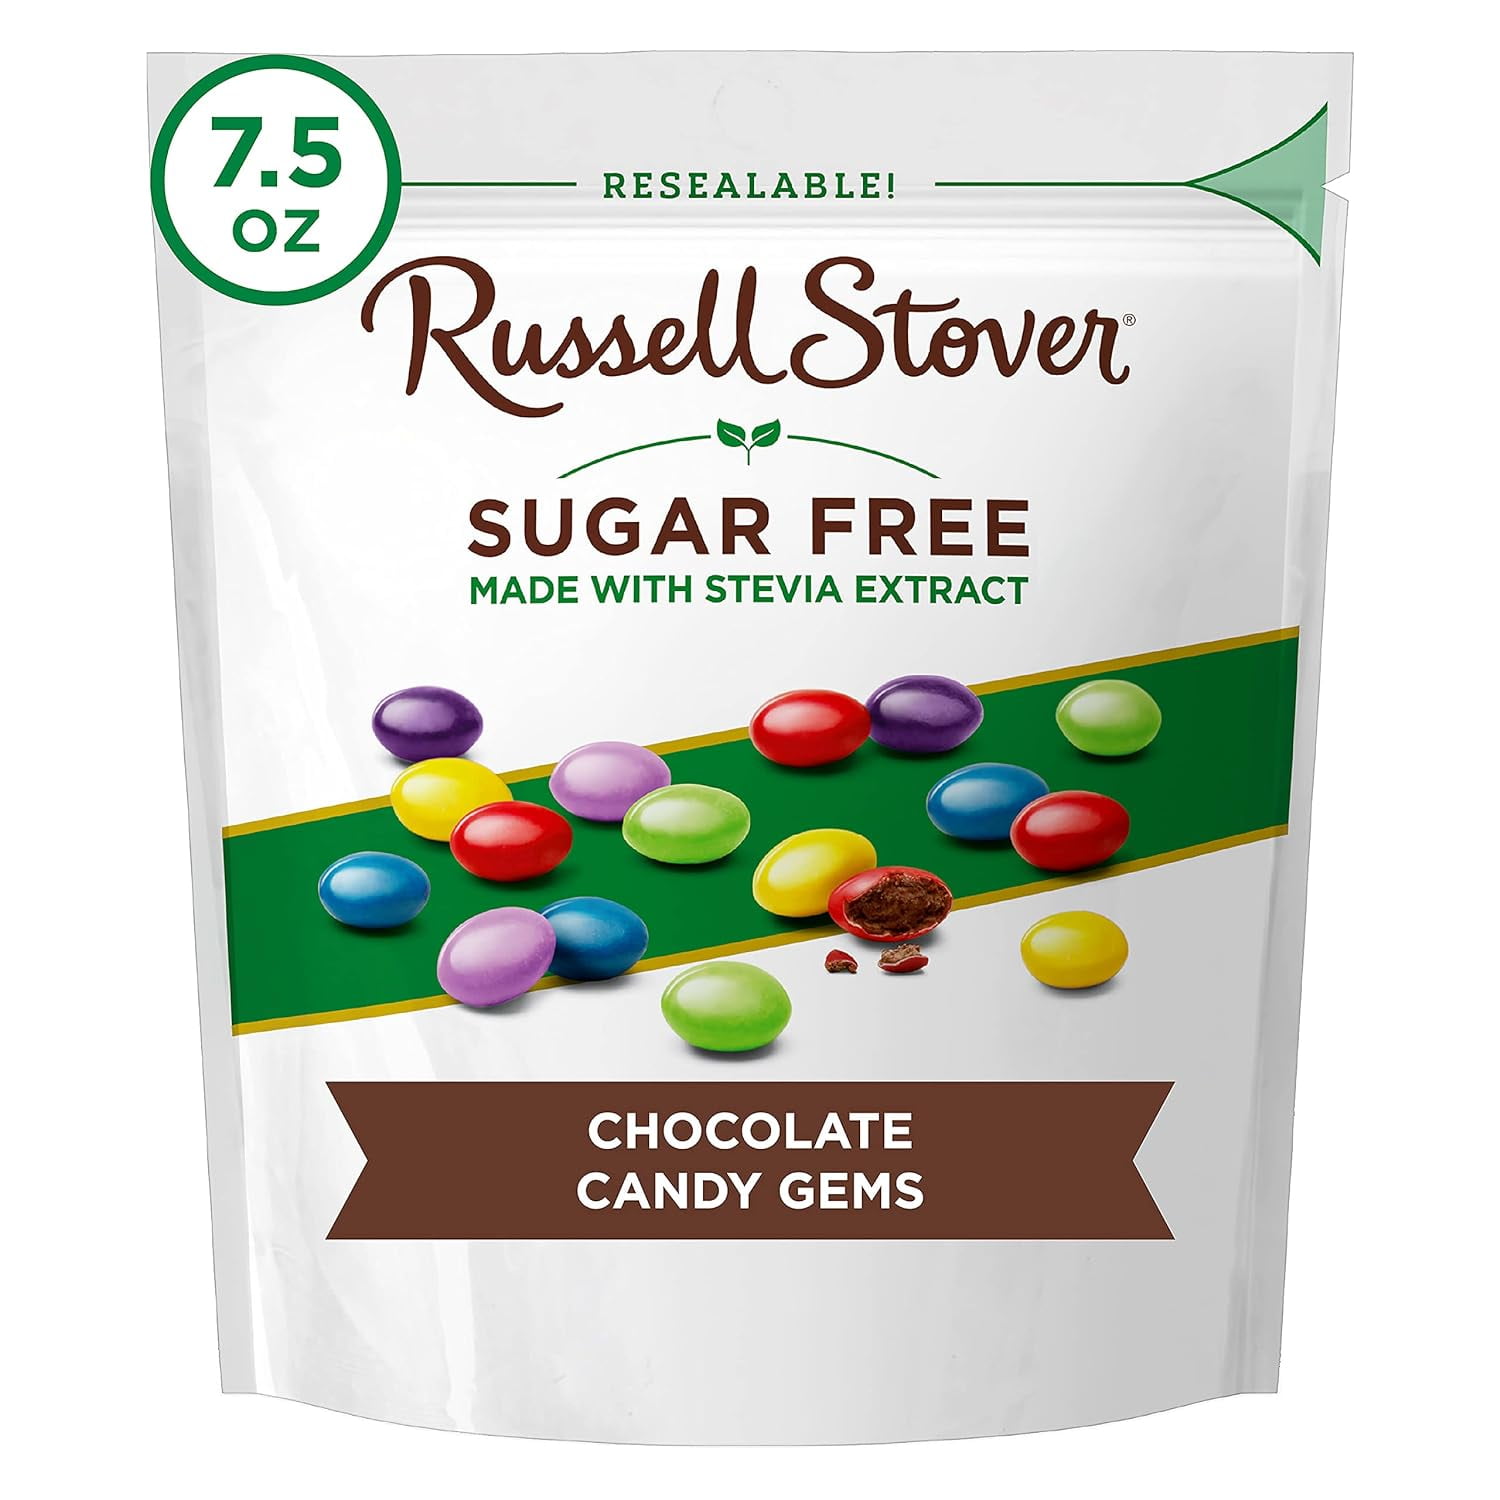 Russell Stover Sugar Free Chocolate Candy Coated Gems, 7.5 Ounce Bag ...